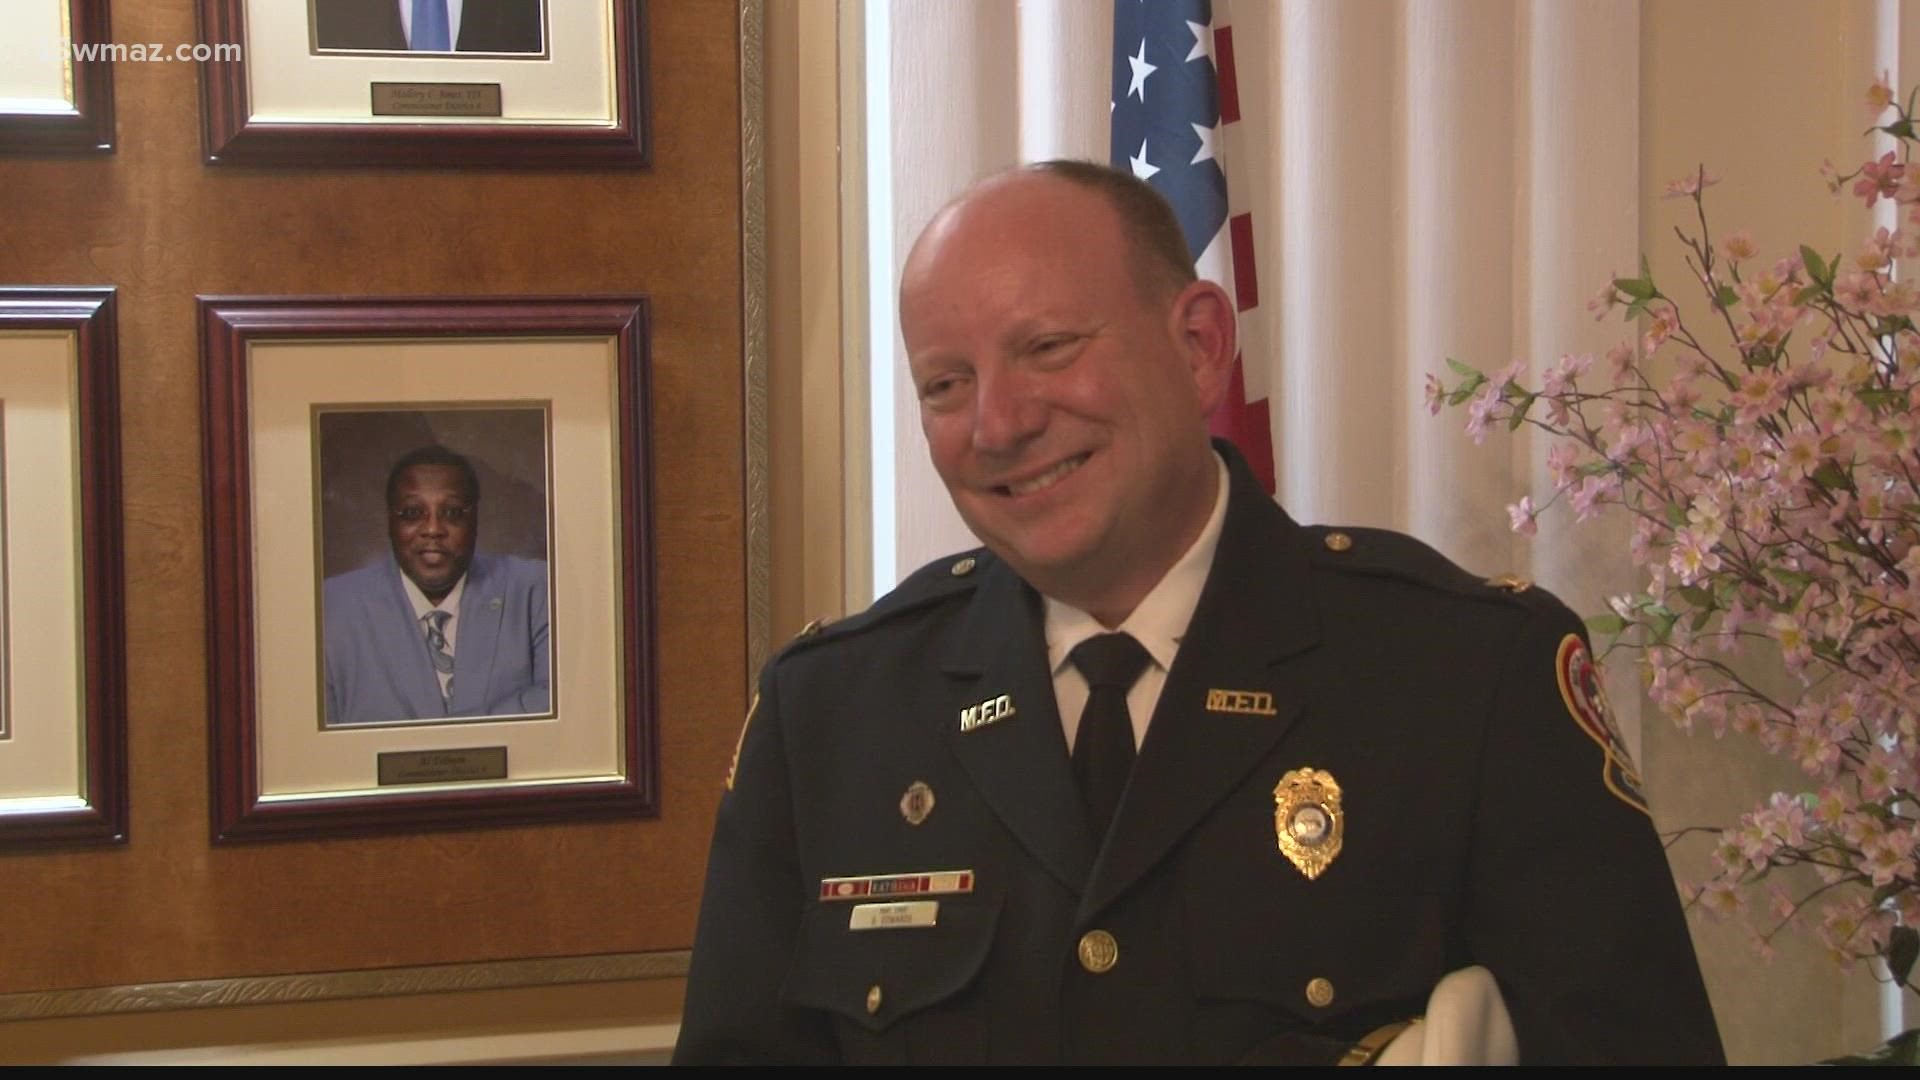 Edwards has been with the Macon-Bibb County Fire Department for 32 years, where he was promoted to Assistant Fire Chief in 2013.